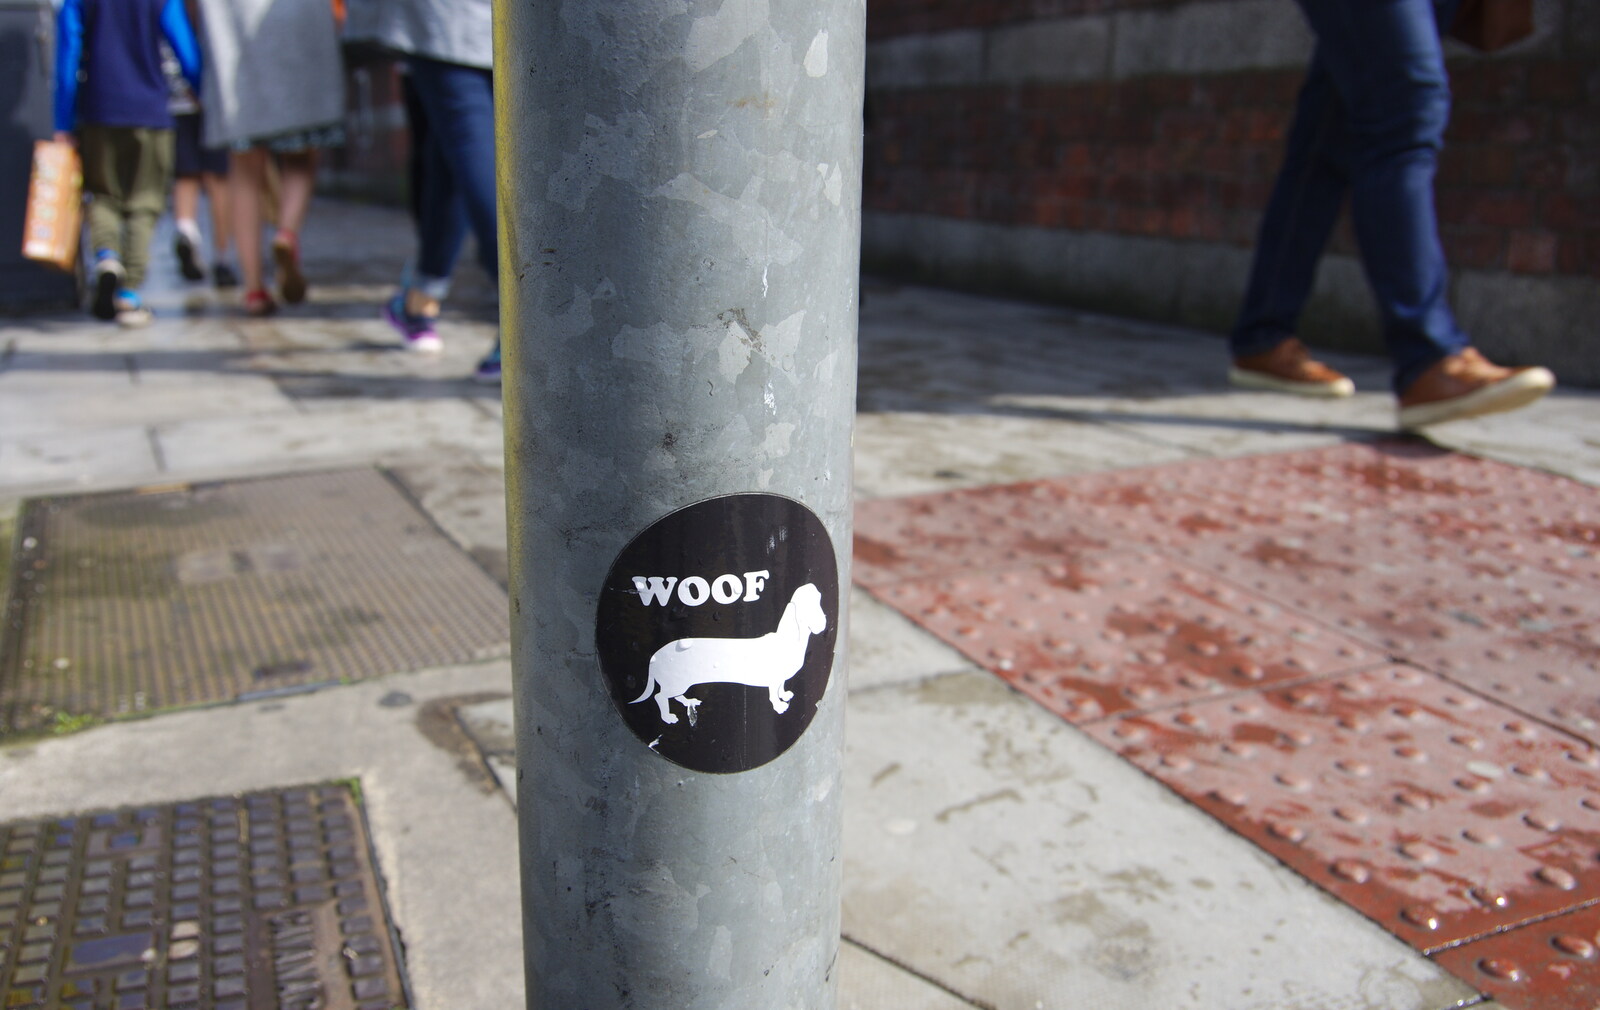 A sticker aimed at dogs from Busking in Temple Bar, Dublin, Ireland - 12th August 2019